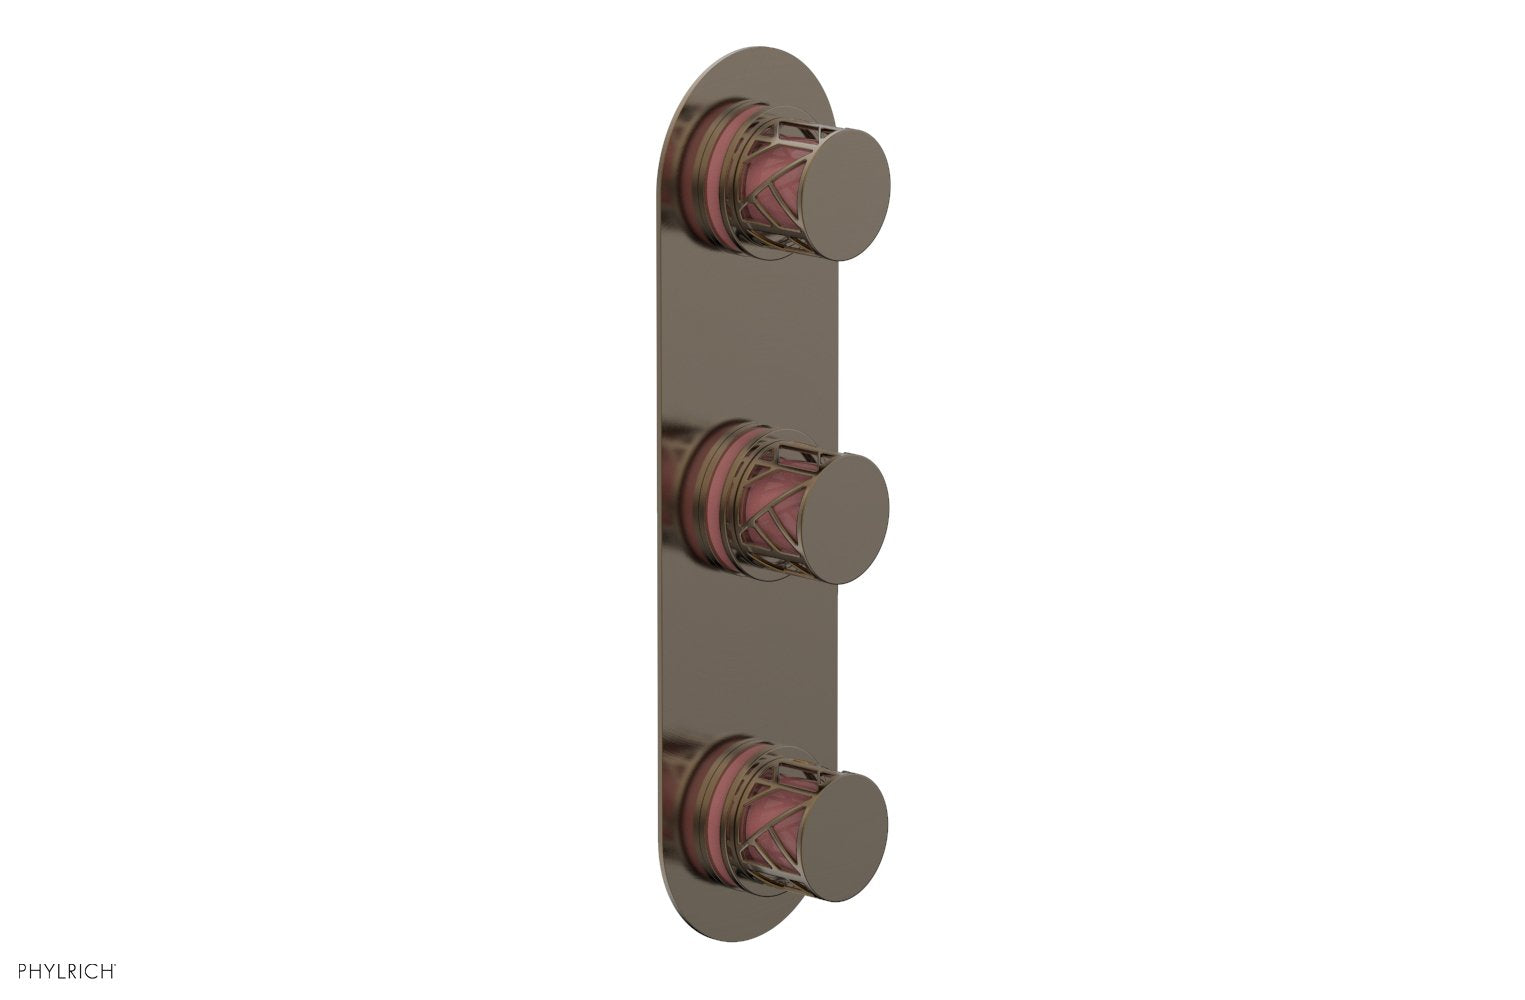 Phylrich JOLIE Thermostatic Valve with Two Volume Control with "Pink" Accents